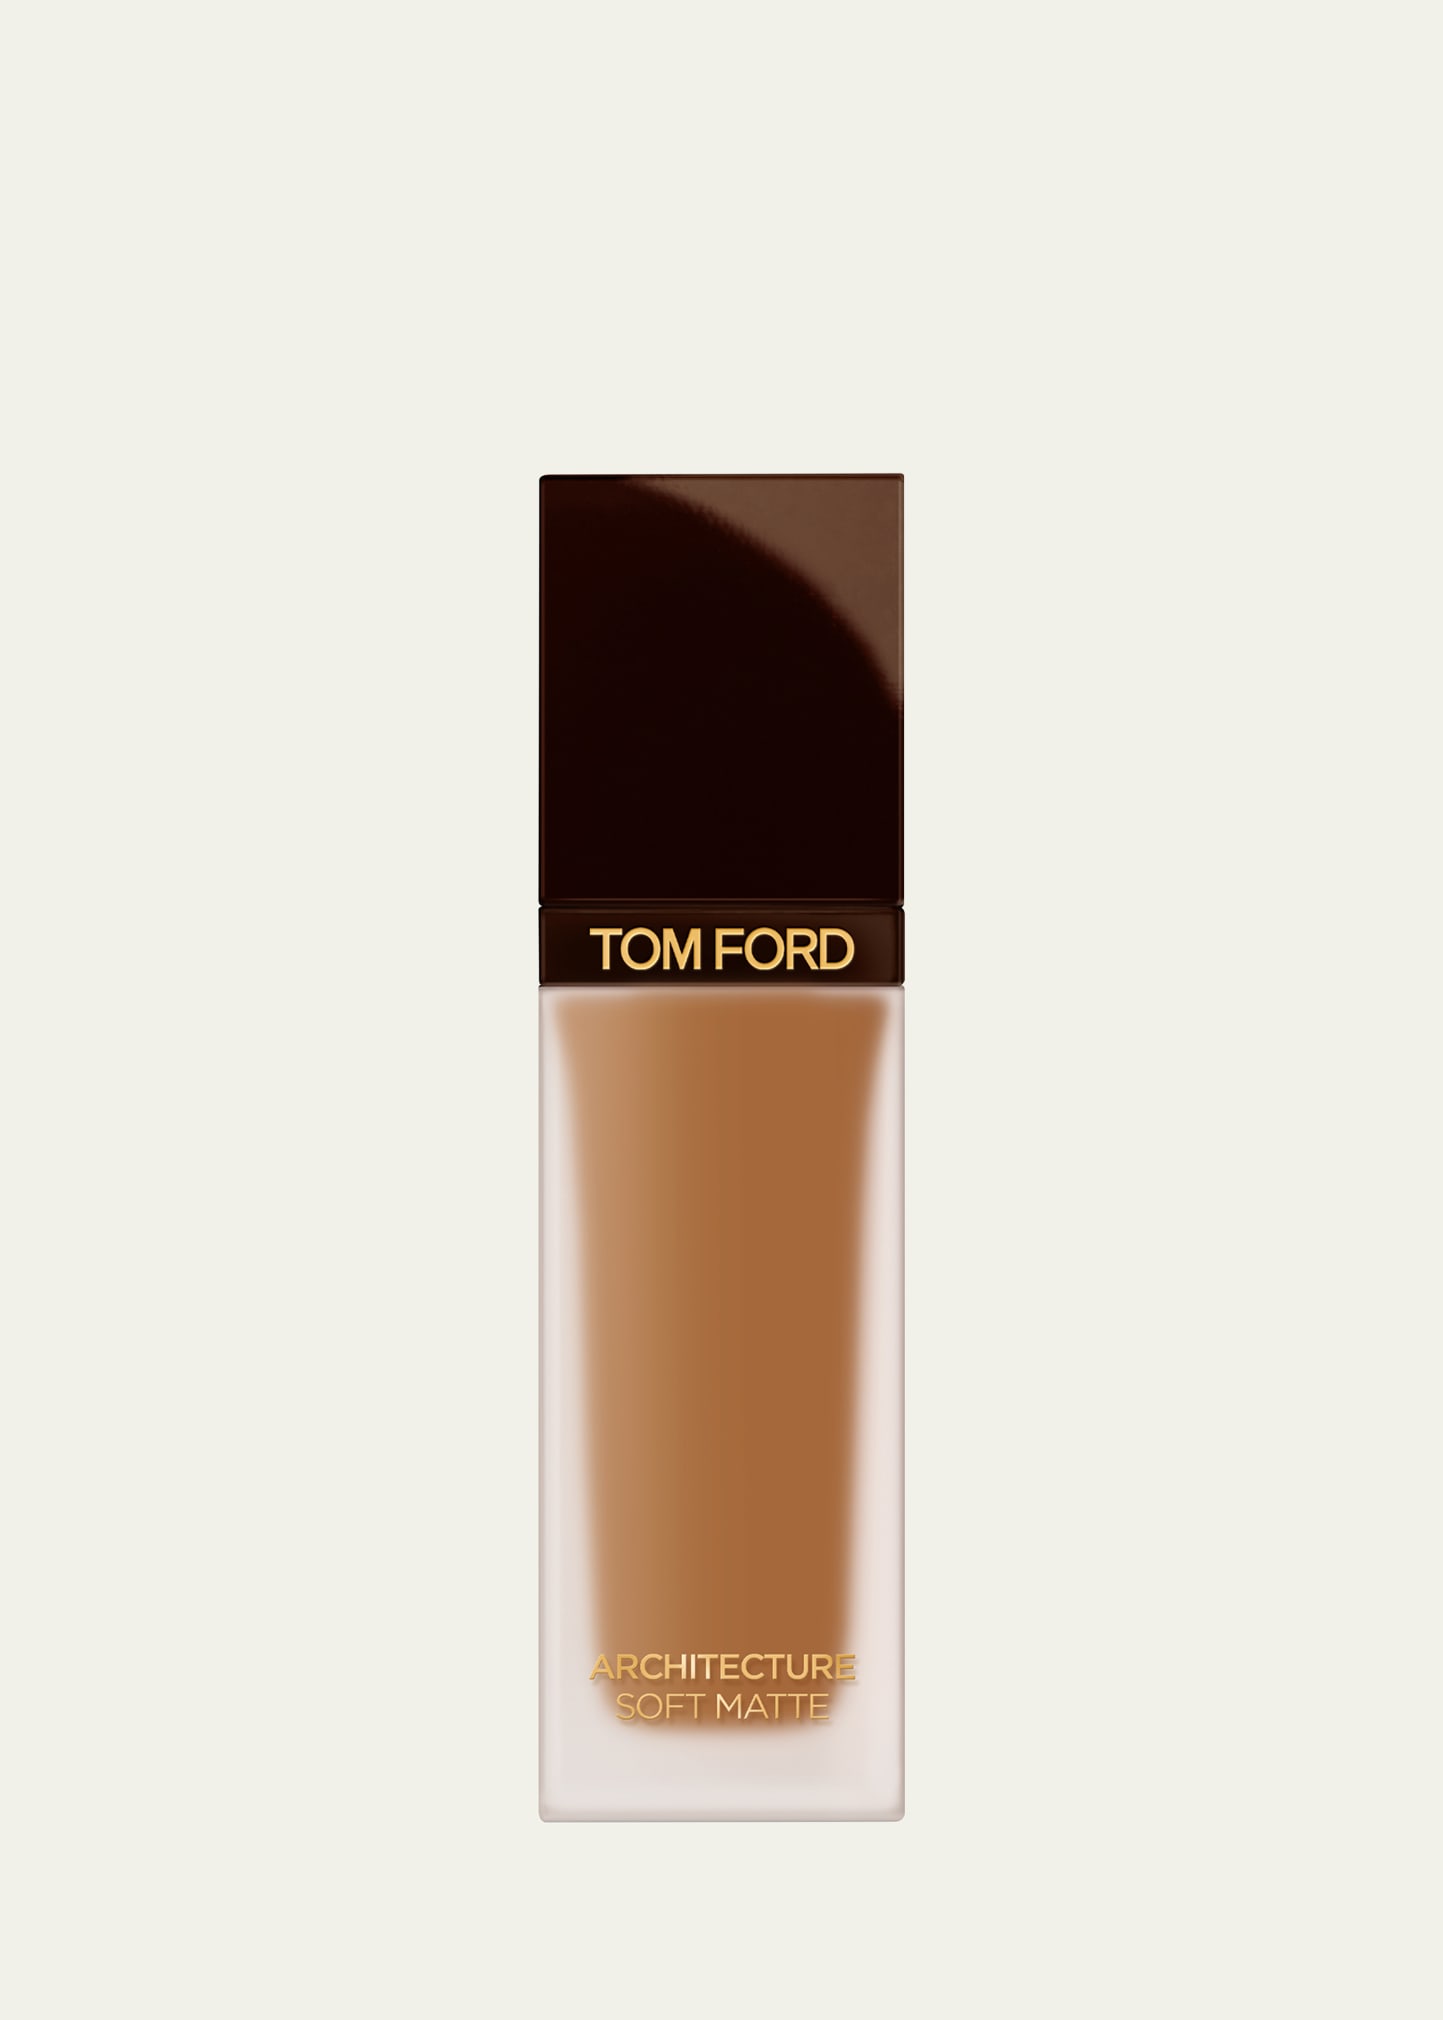 Tom Ford Architecture Soft Matte Foundation In Asm - 10.5 Mocha